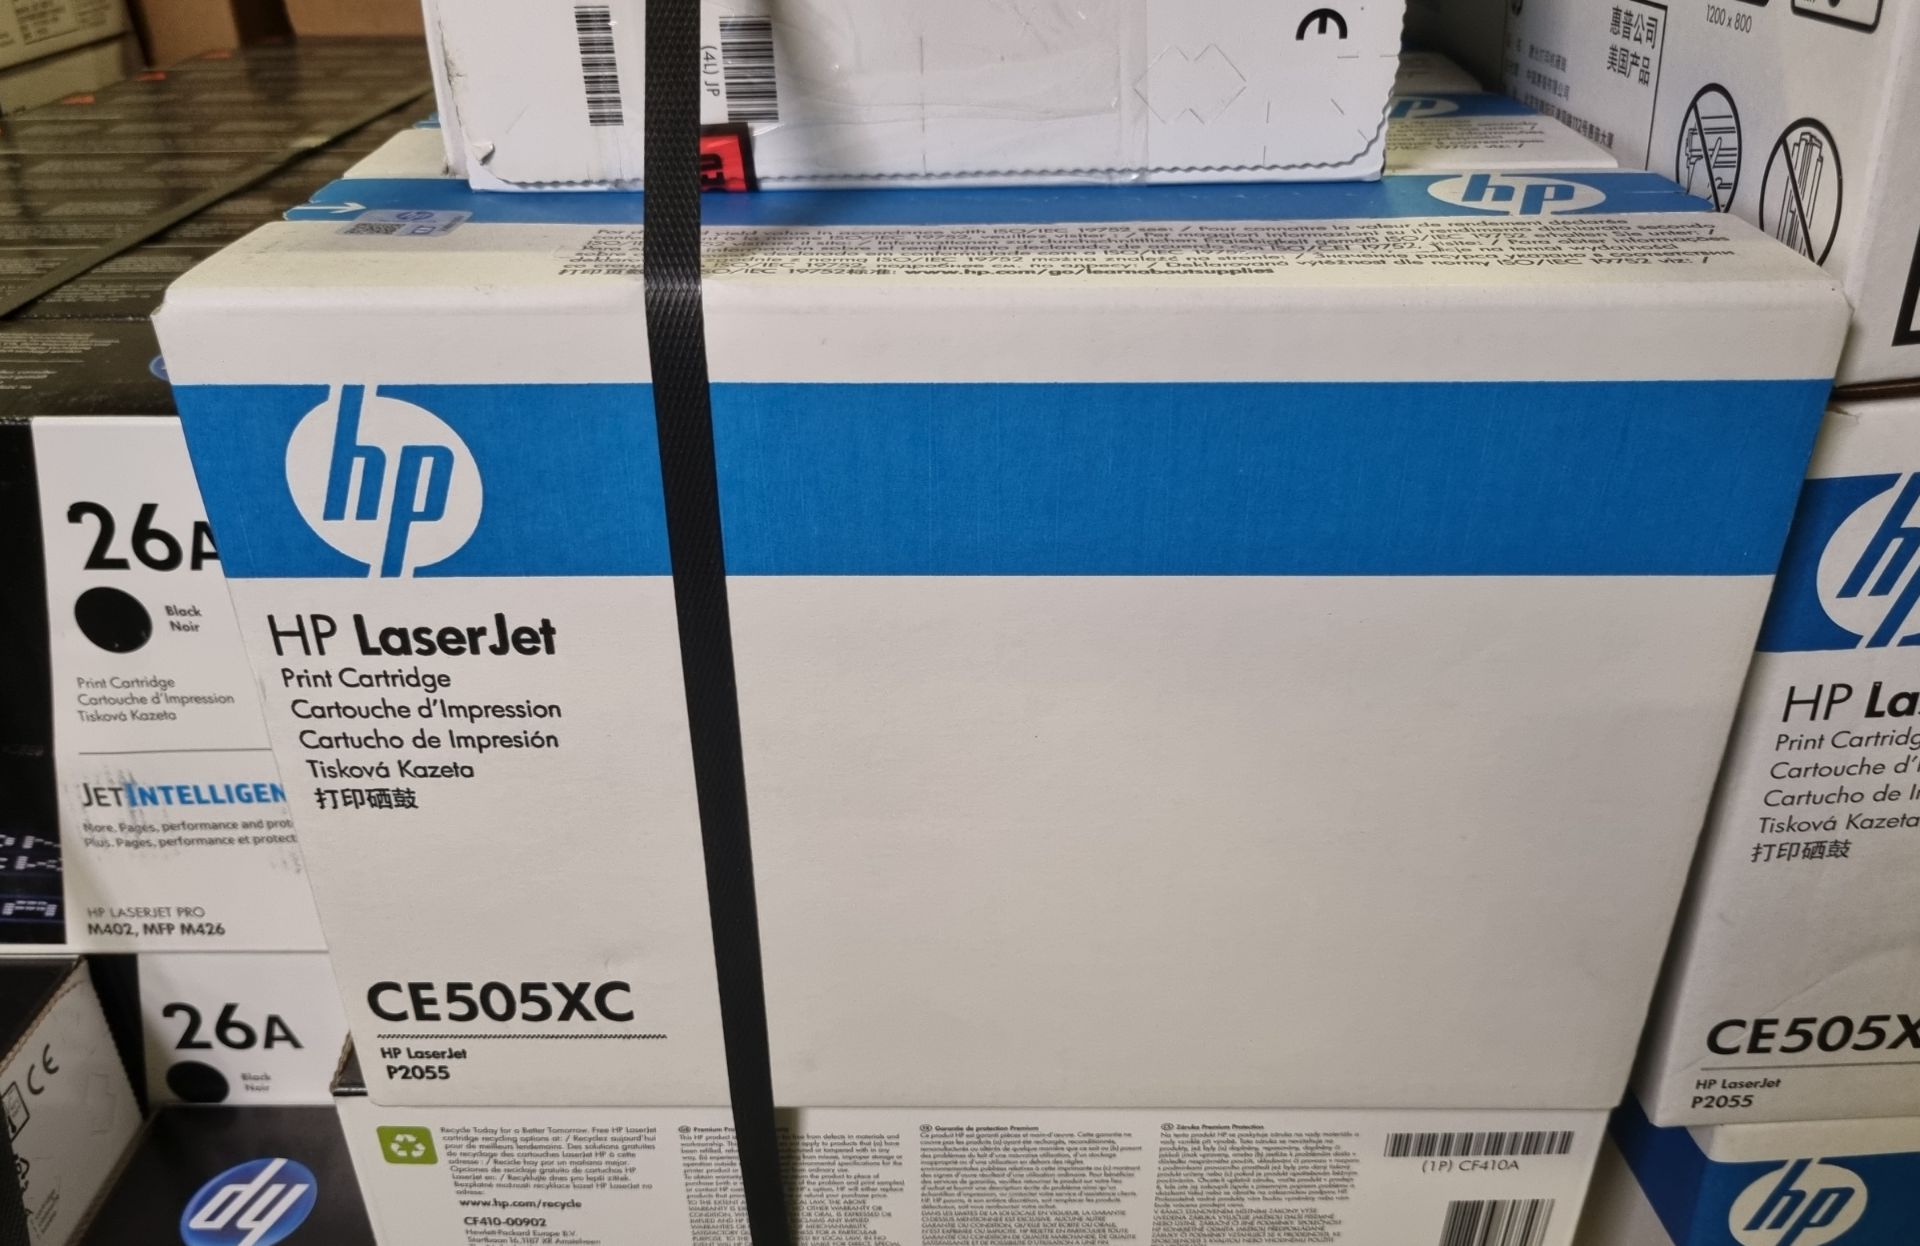 HP toner cartridges - 26A, CE505XC, 410A and 825A - black - approx. 80 cartridges - Image 4 of 6